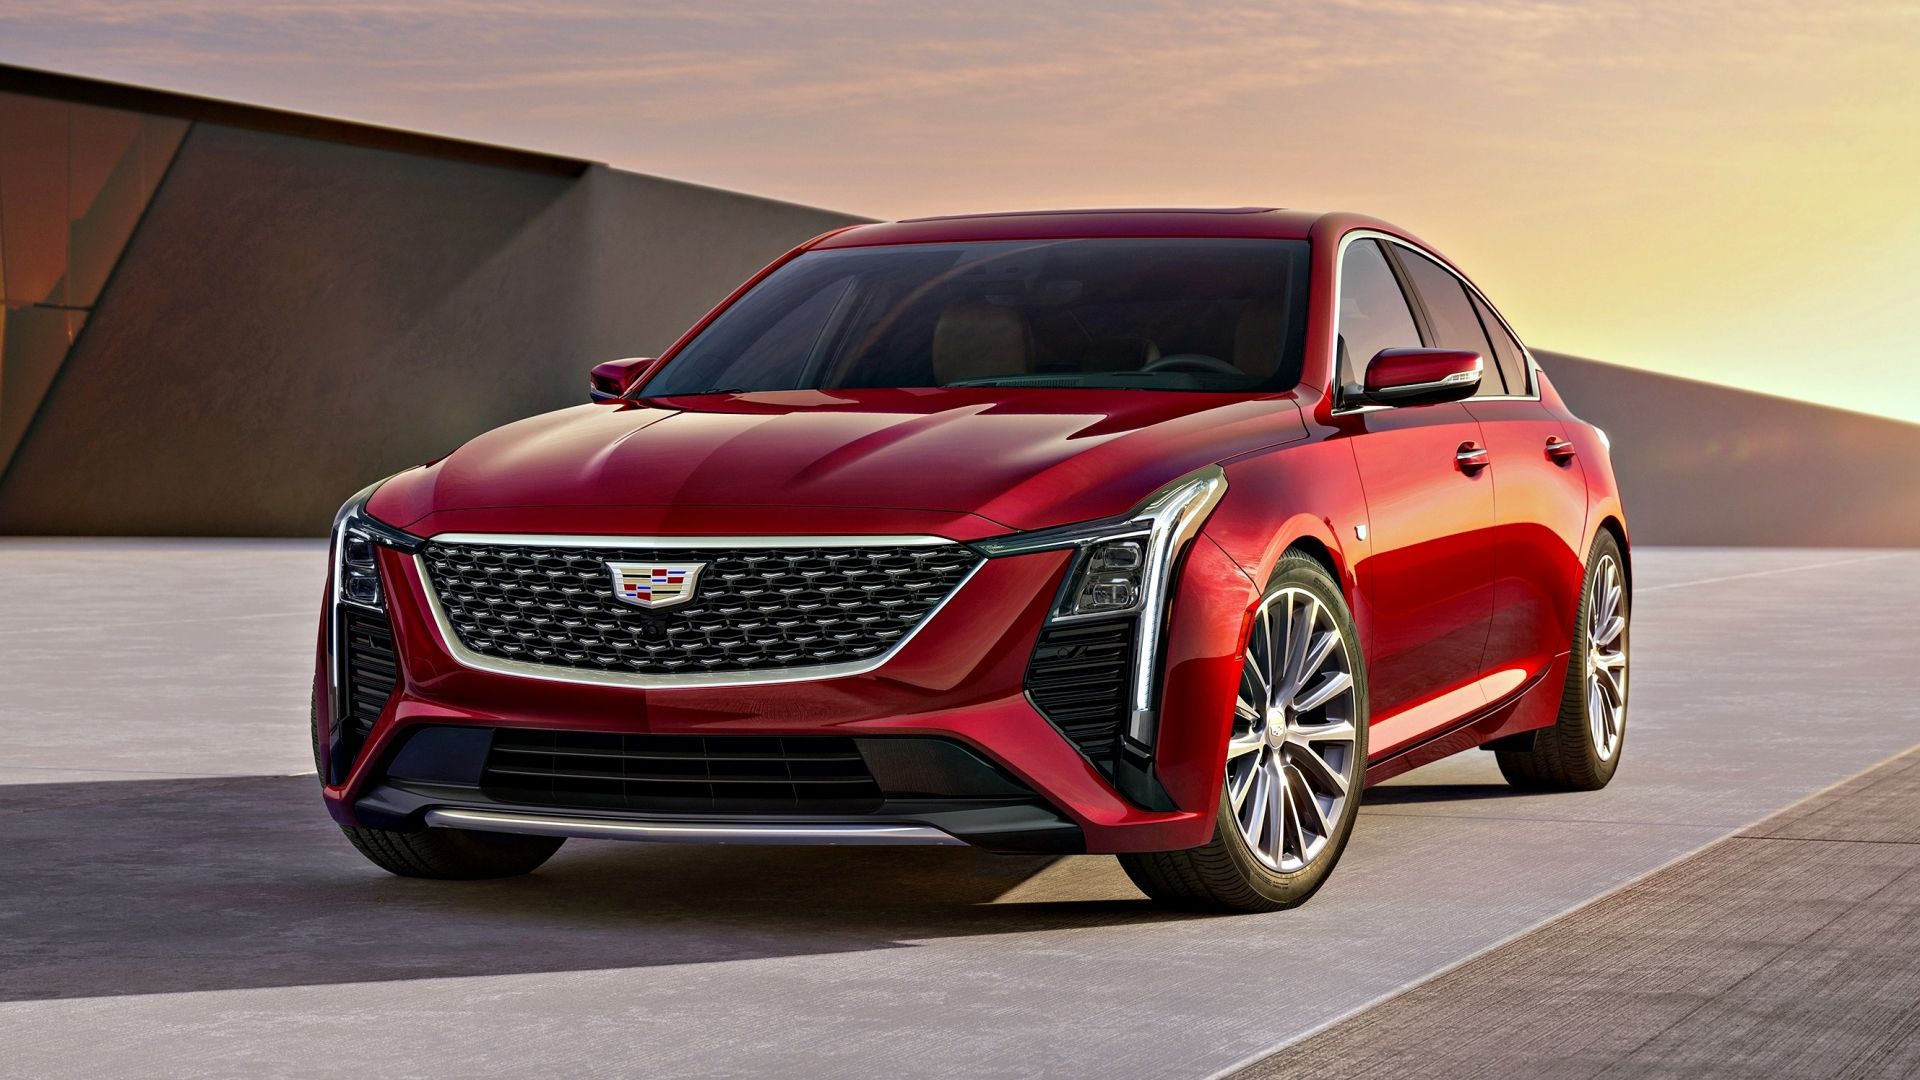 2025 Cadillac CT5: Showcasing GM’s Commitment To The Sedan Body Style